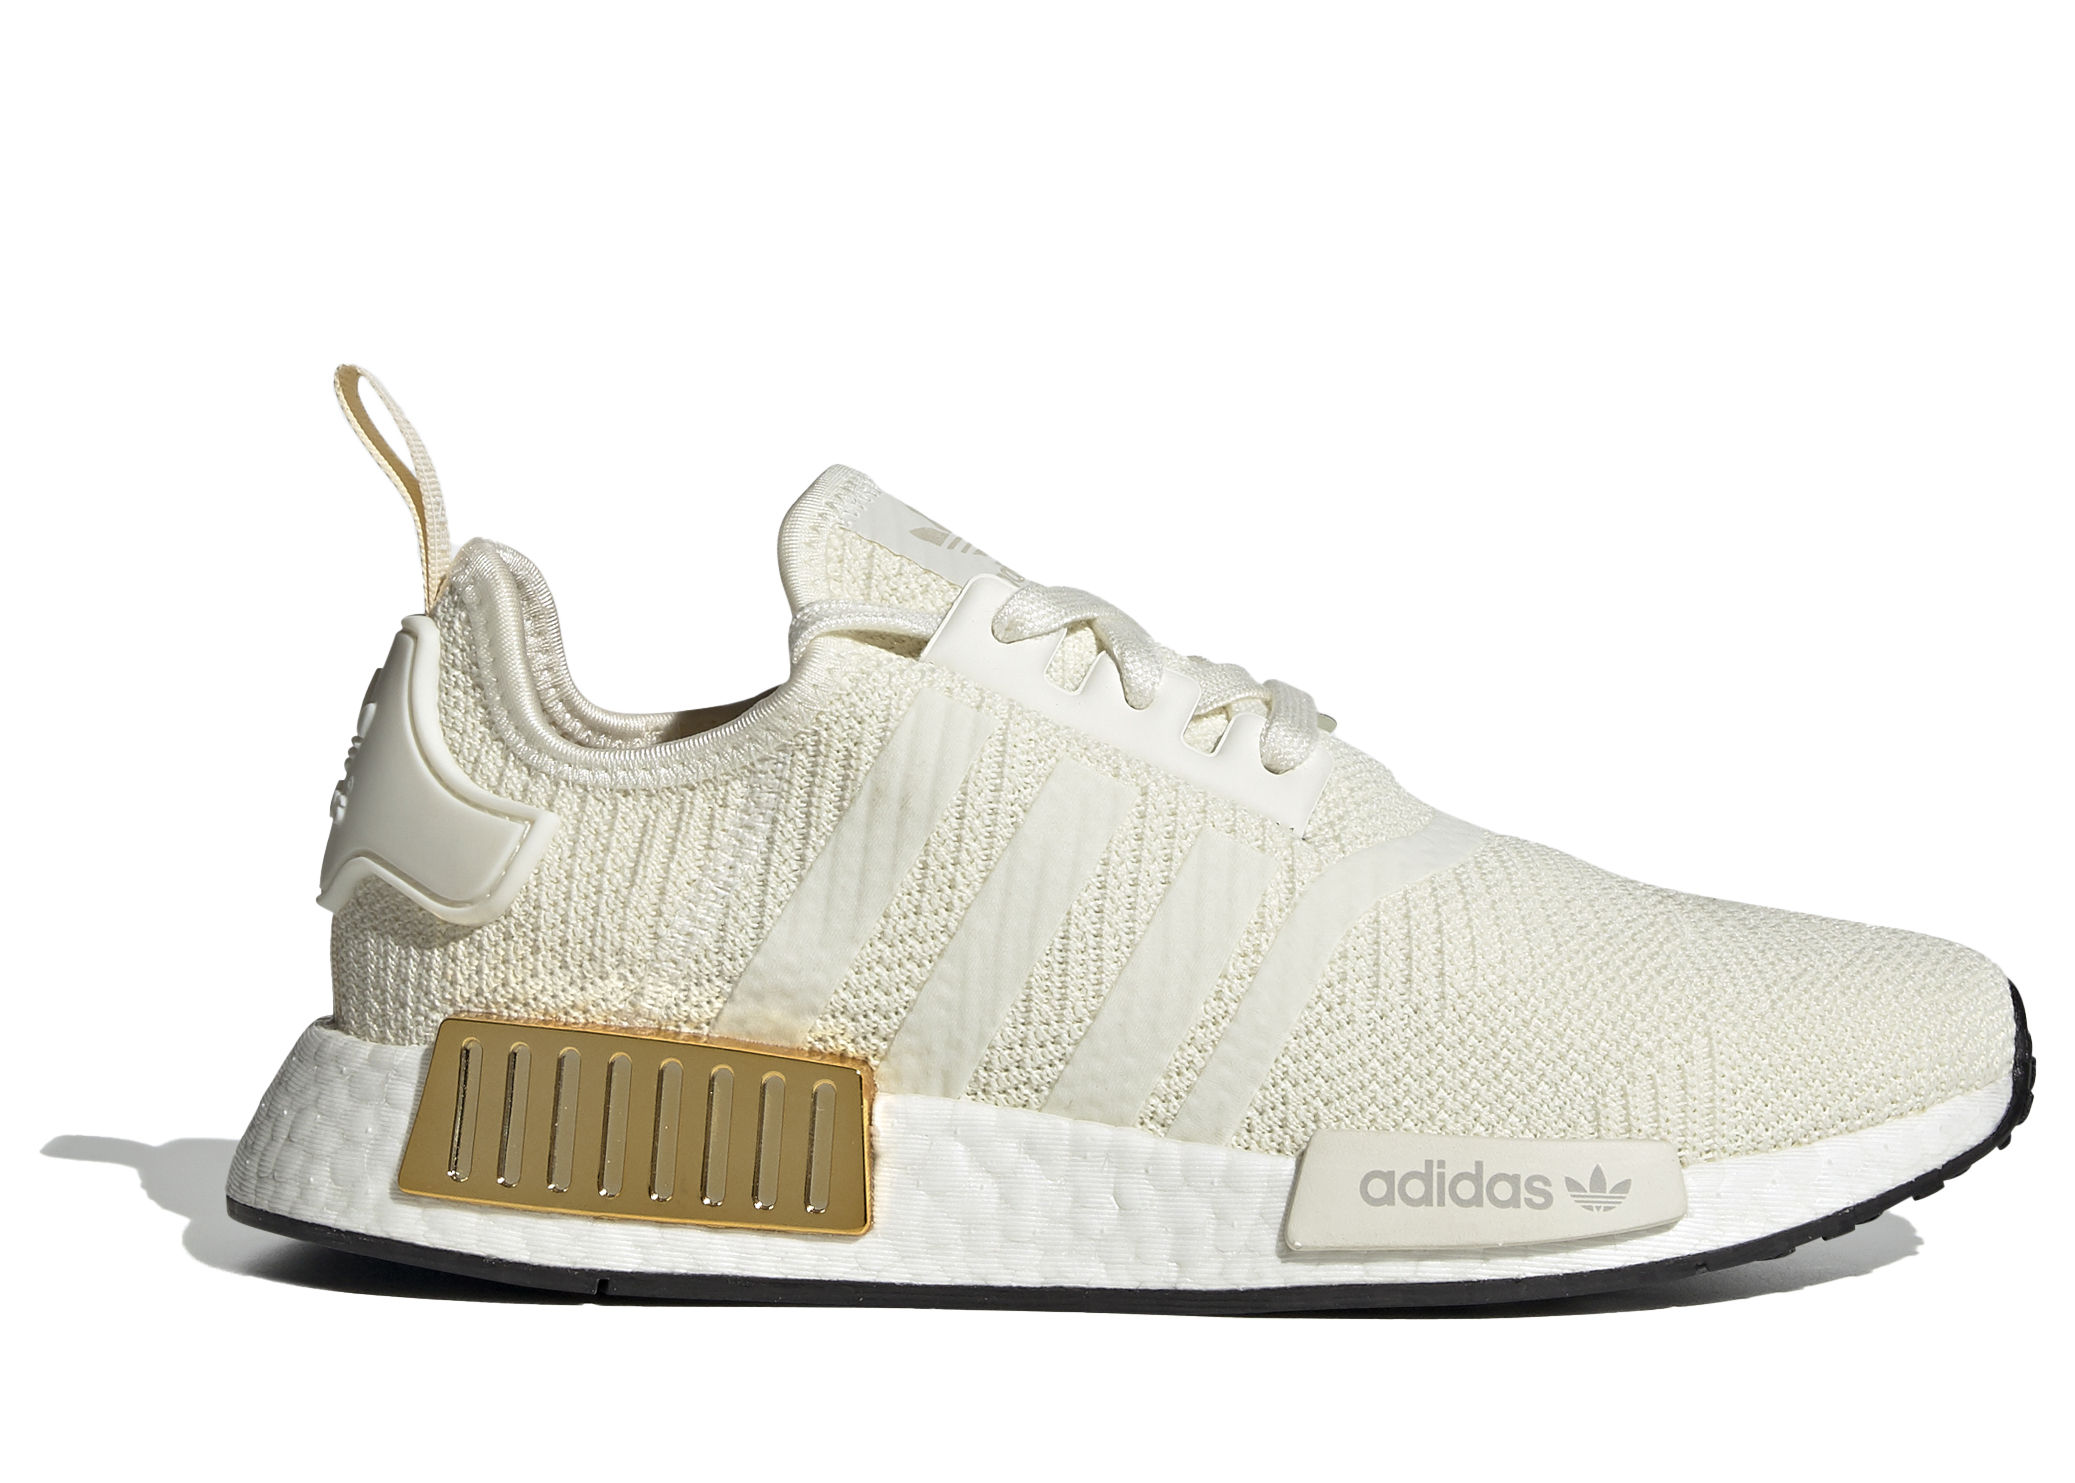 adidas NMD_R1 Off White (W) - EE5174